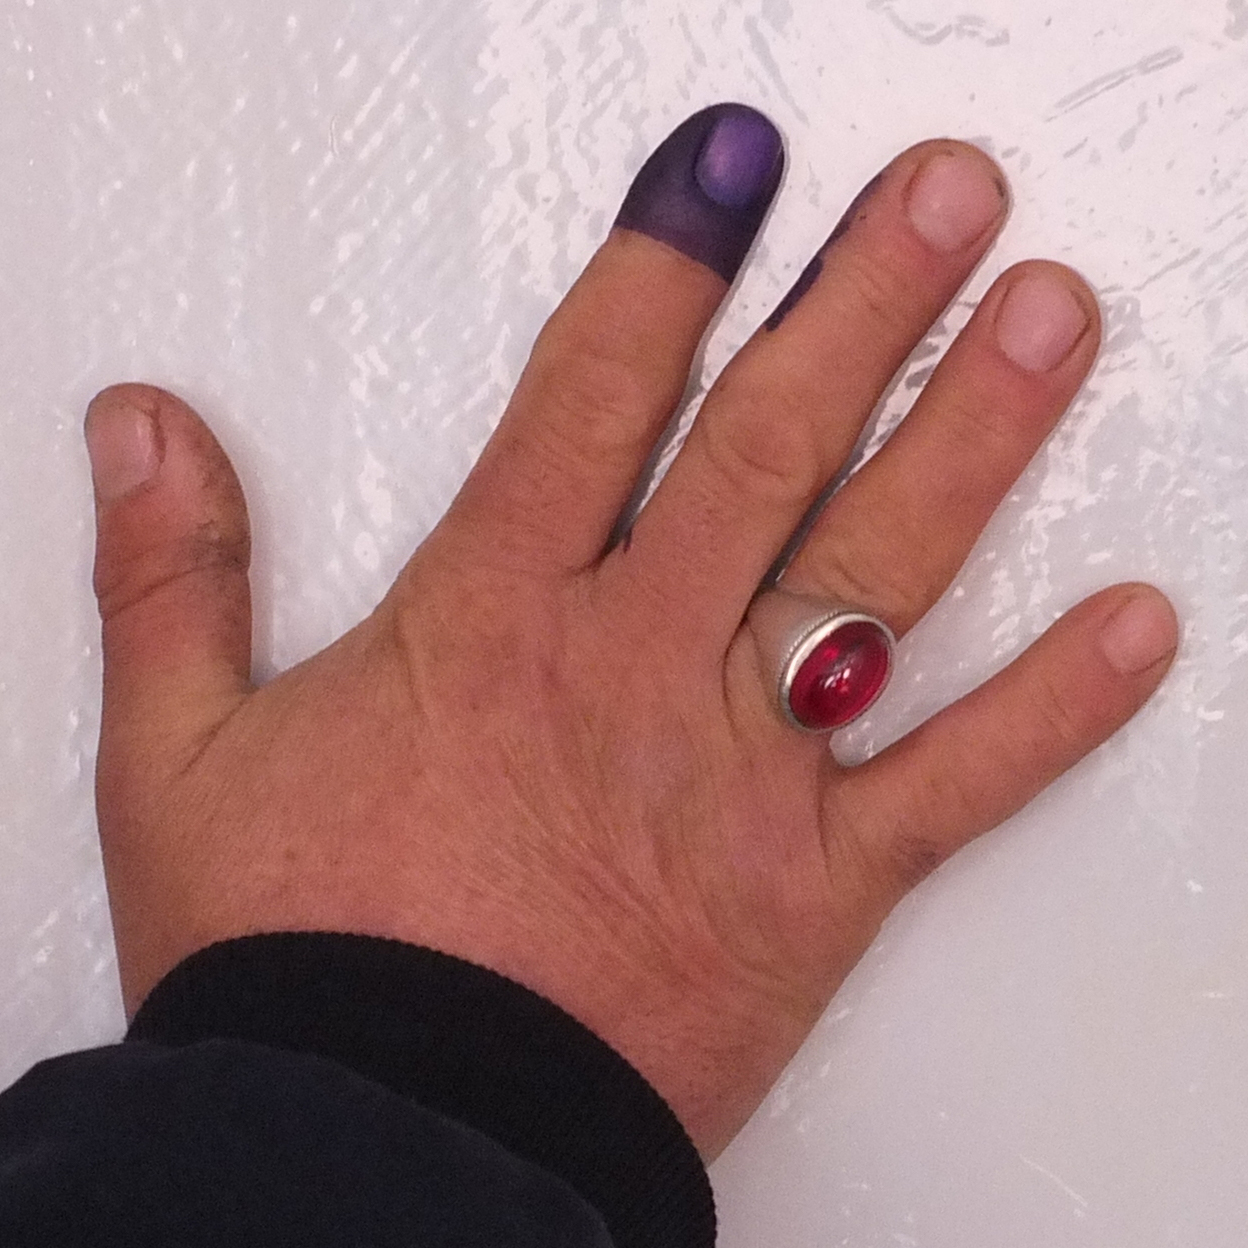 Purple stain proving that someone has voted